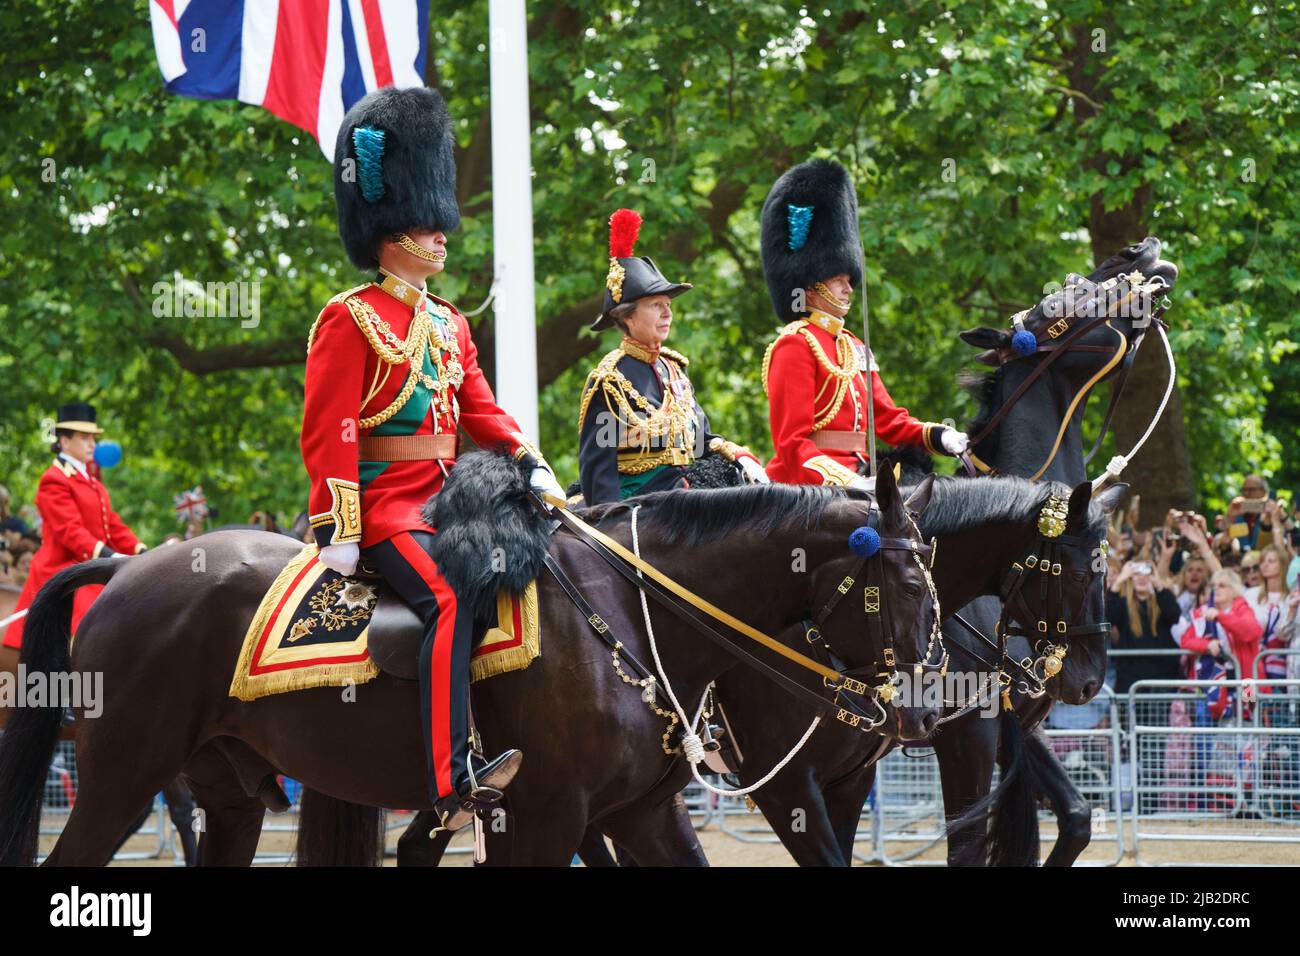 LONDON - JUNE 2: William, Duke of Cambridge, Princess Anne, Princess Royal ride down The Mall, at  the Trooping the Colour ceremony on June 2, 2022 in central London. Photo by David Levenson Credit: David Levenson/Alamy Live News Stock Photo